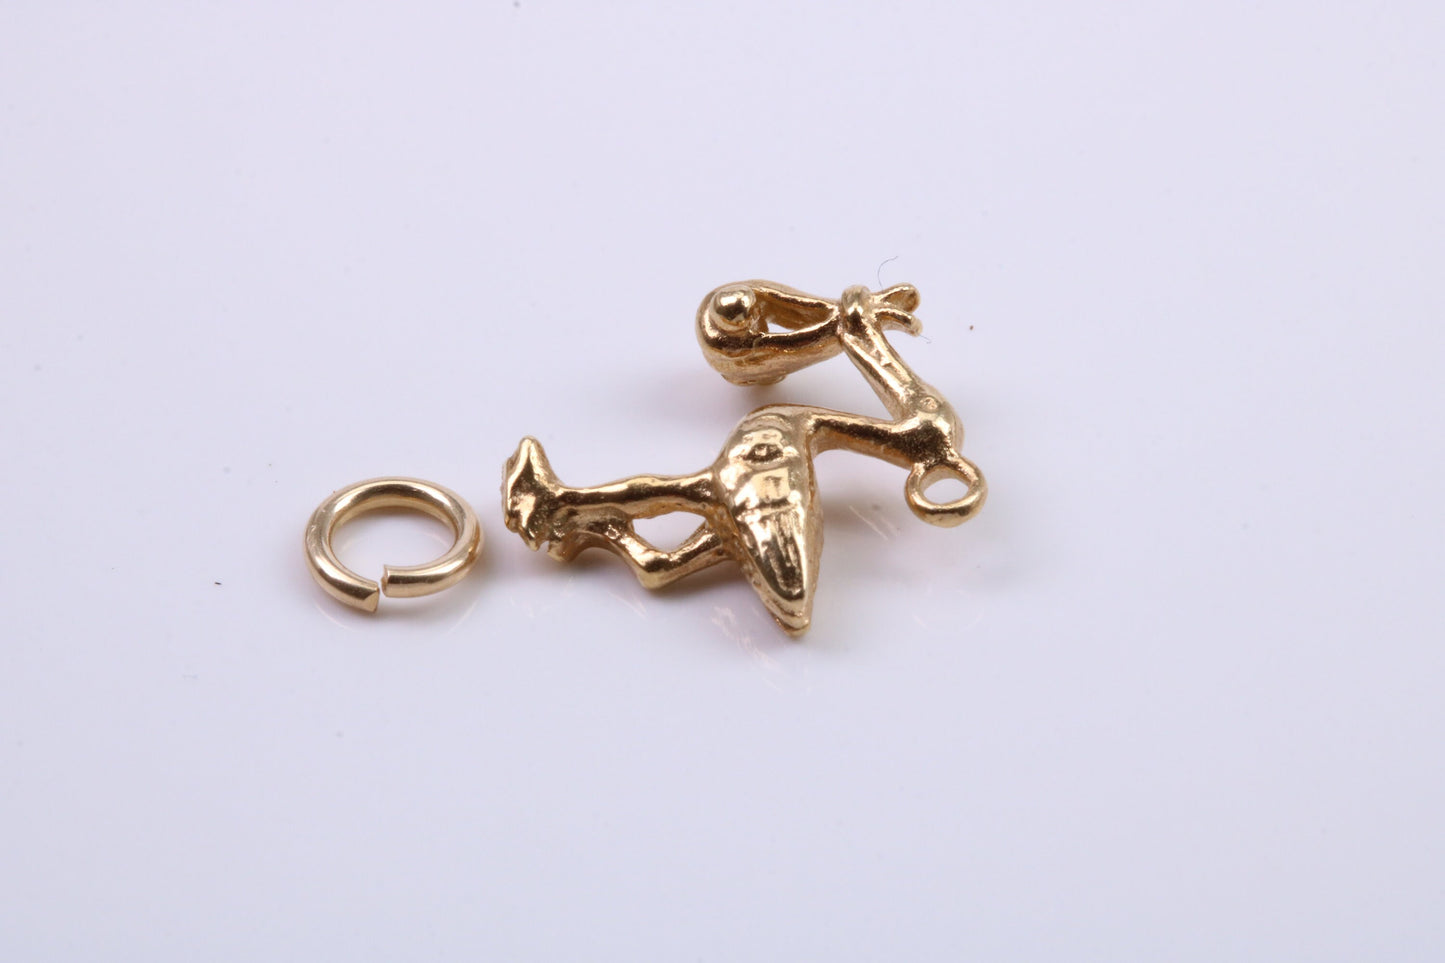 Flying Stork Delivering Baby Charm, Traditional Charm, Made from Solid 9ct Yellow Gold, British Hallmarked, Complete with Attachment Link